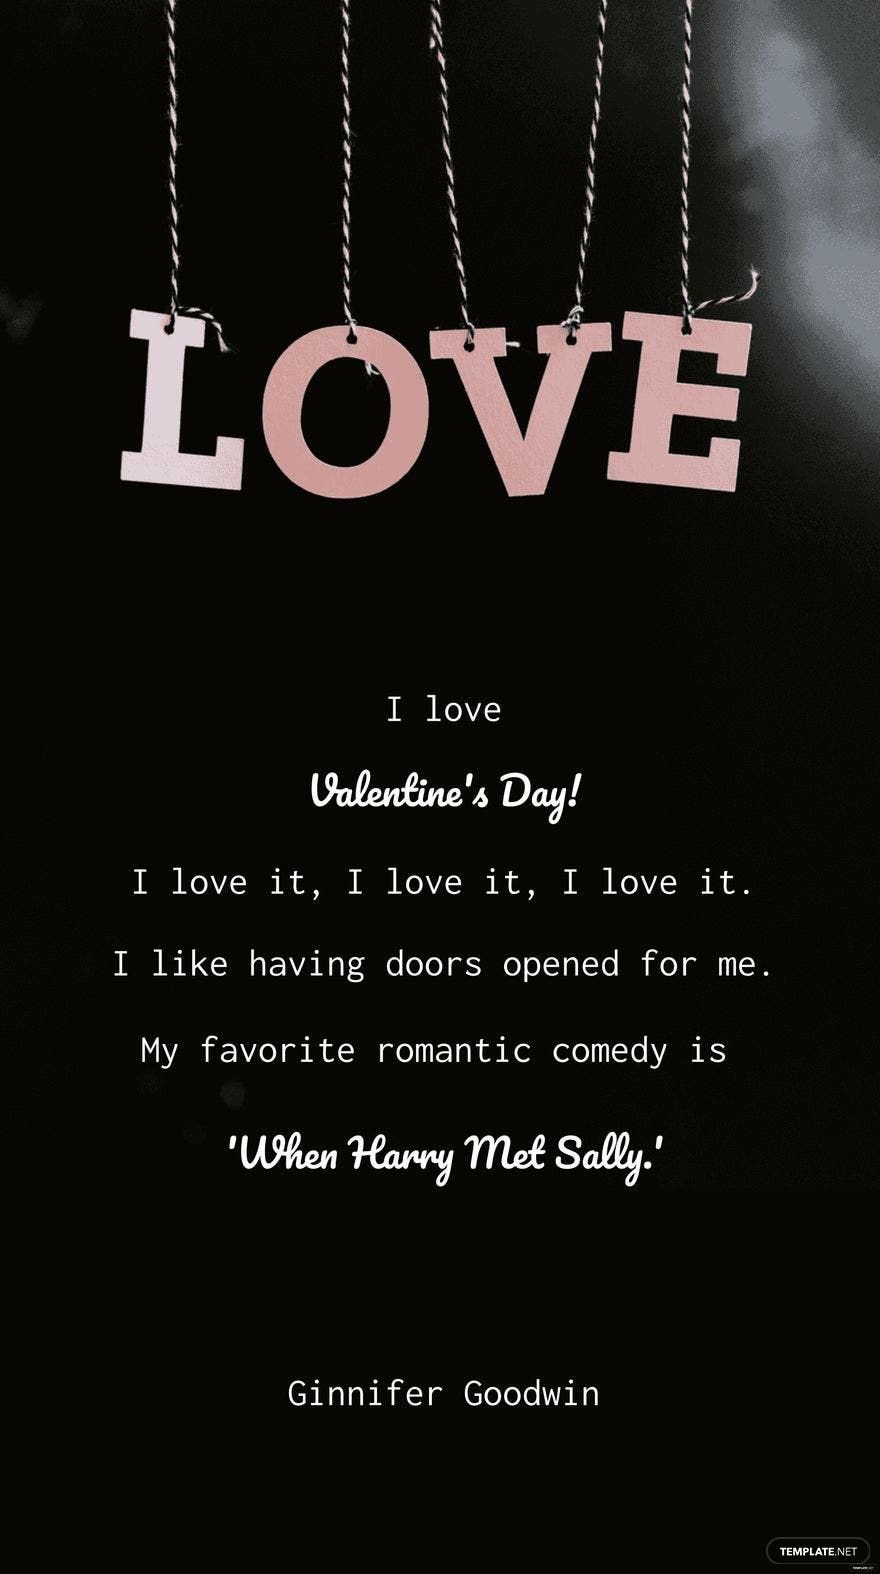 Ginnifer Goodwin - I love Valentine's Day! I love it, I love it, I love it. I like having doors opened for me. My favorite romantic comedy is 'When Harry Met Sally.'